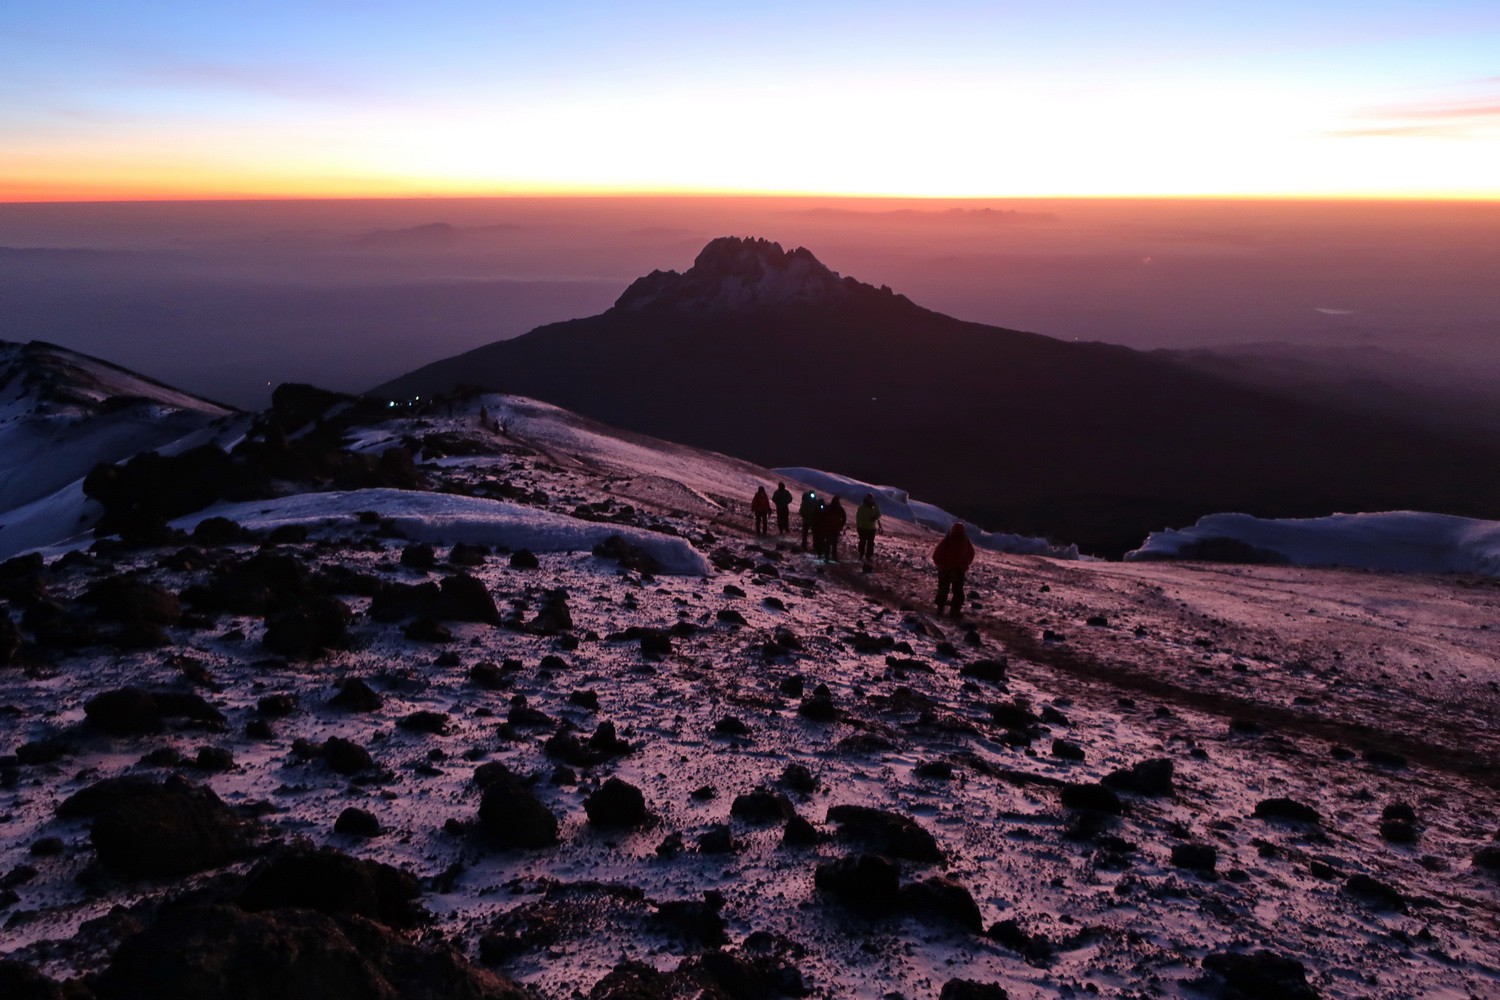 5148 meters high Mawenzi seen from the eastern crater rim of Kilimanjaro